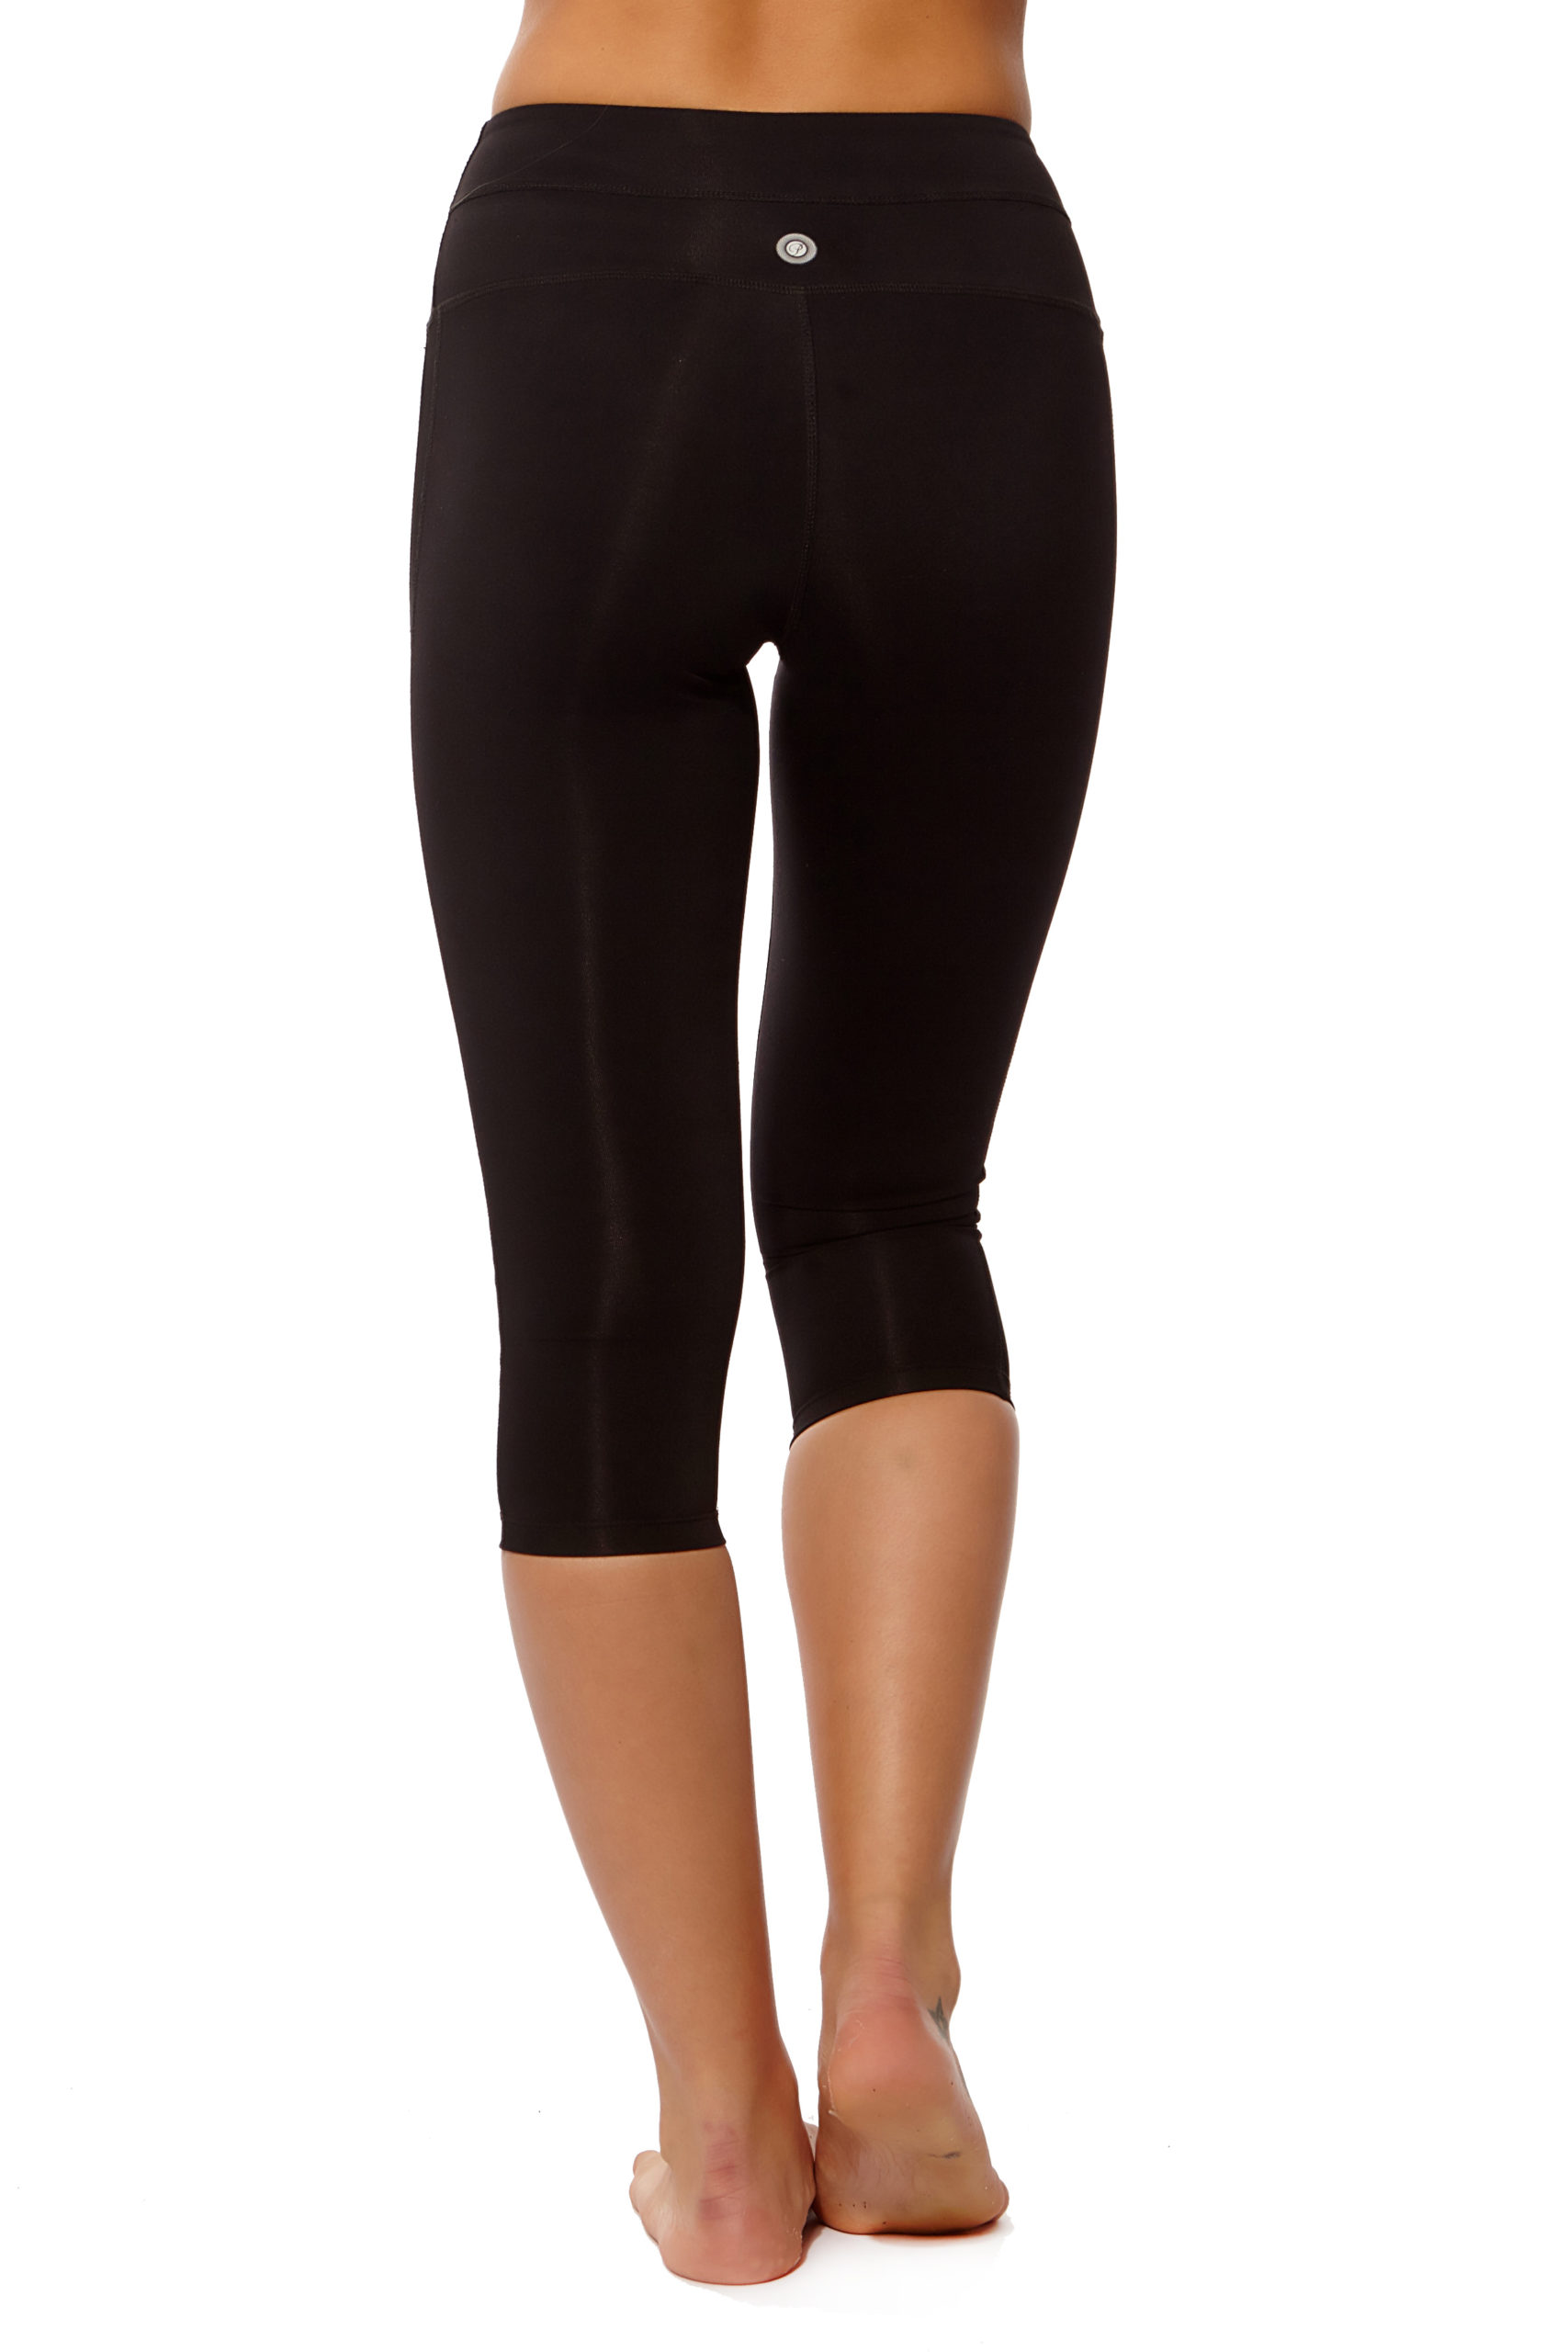 Form Fitting Leggings with Side Mesh and Double Band Capris (3) - prjon